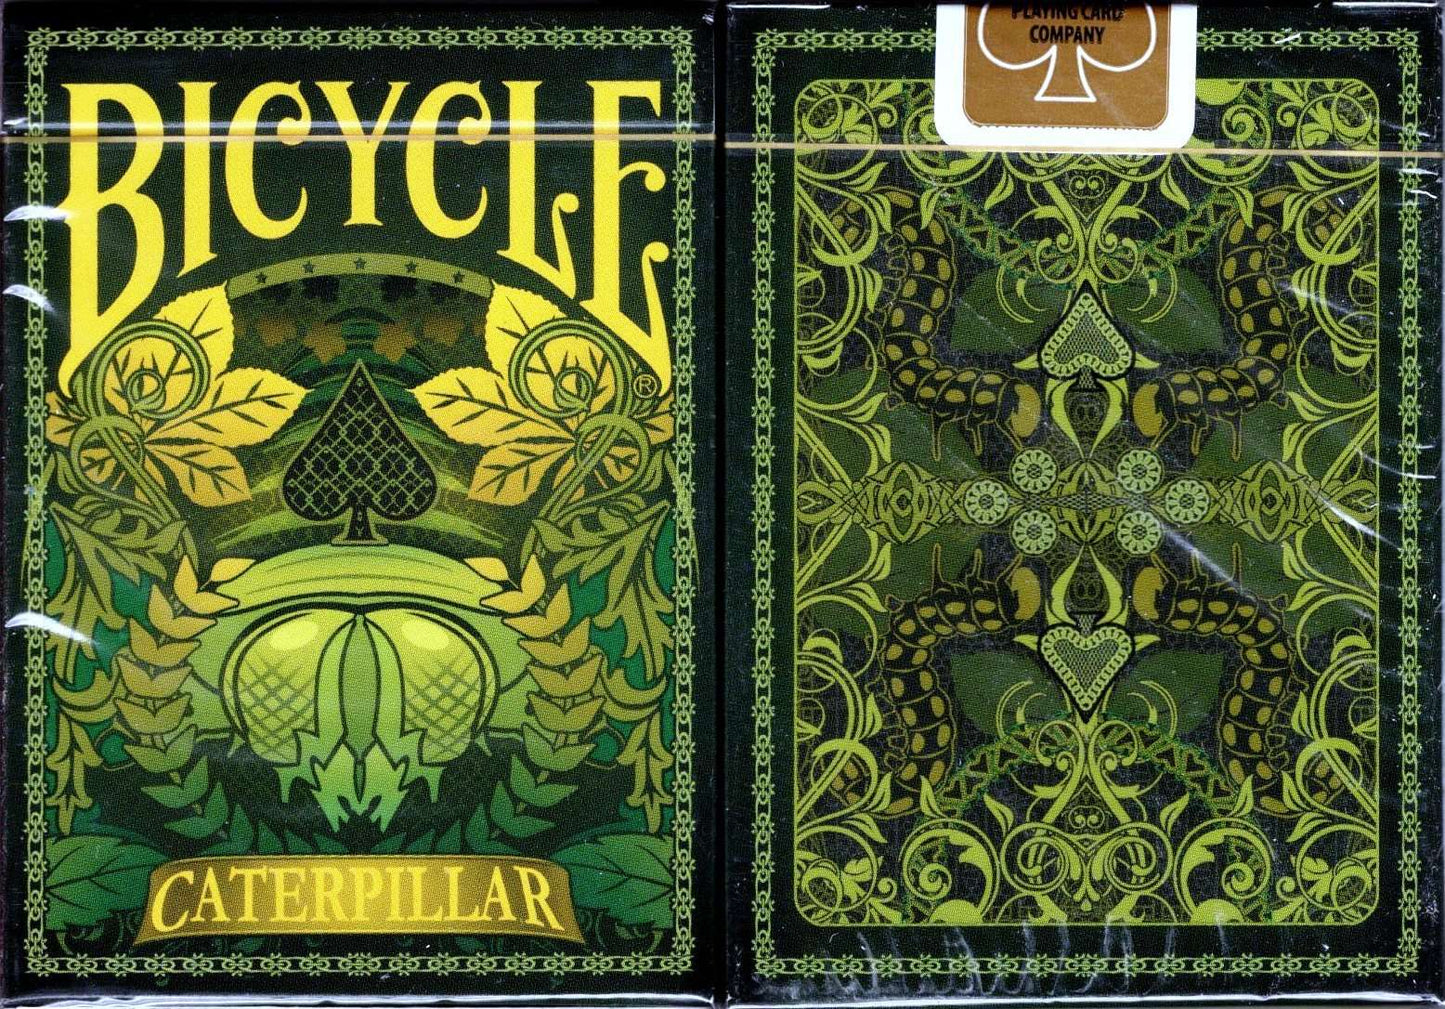 PlayingCardDecks.com-Caterpillar Gilded Bicycle Playing Cards: Olive